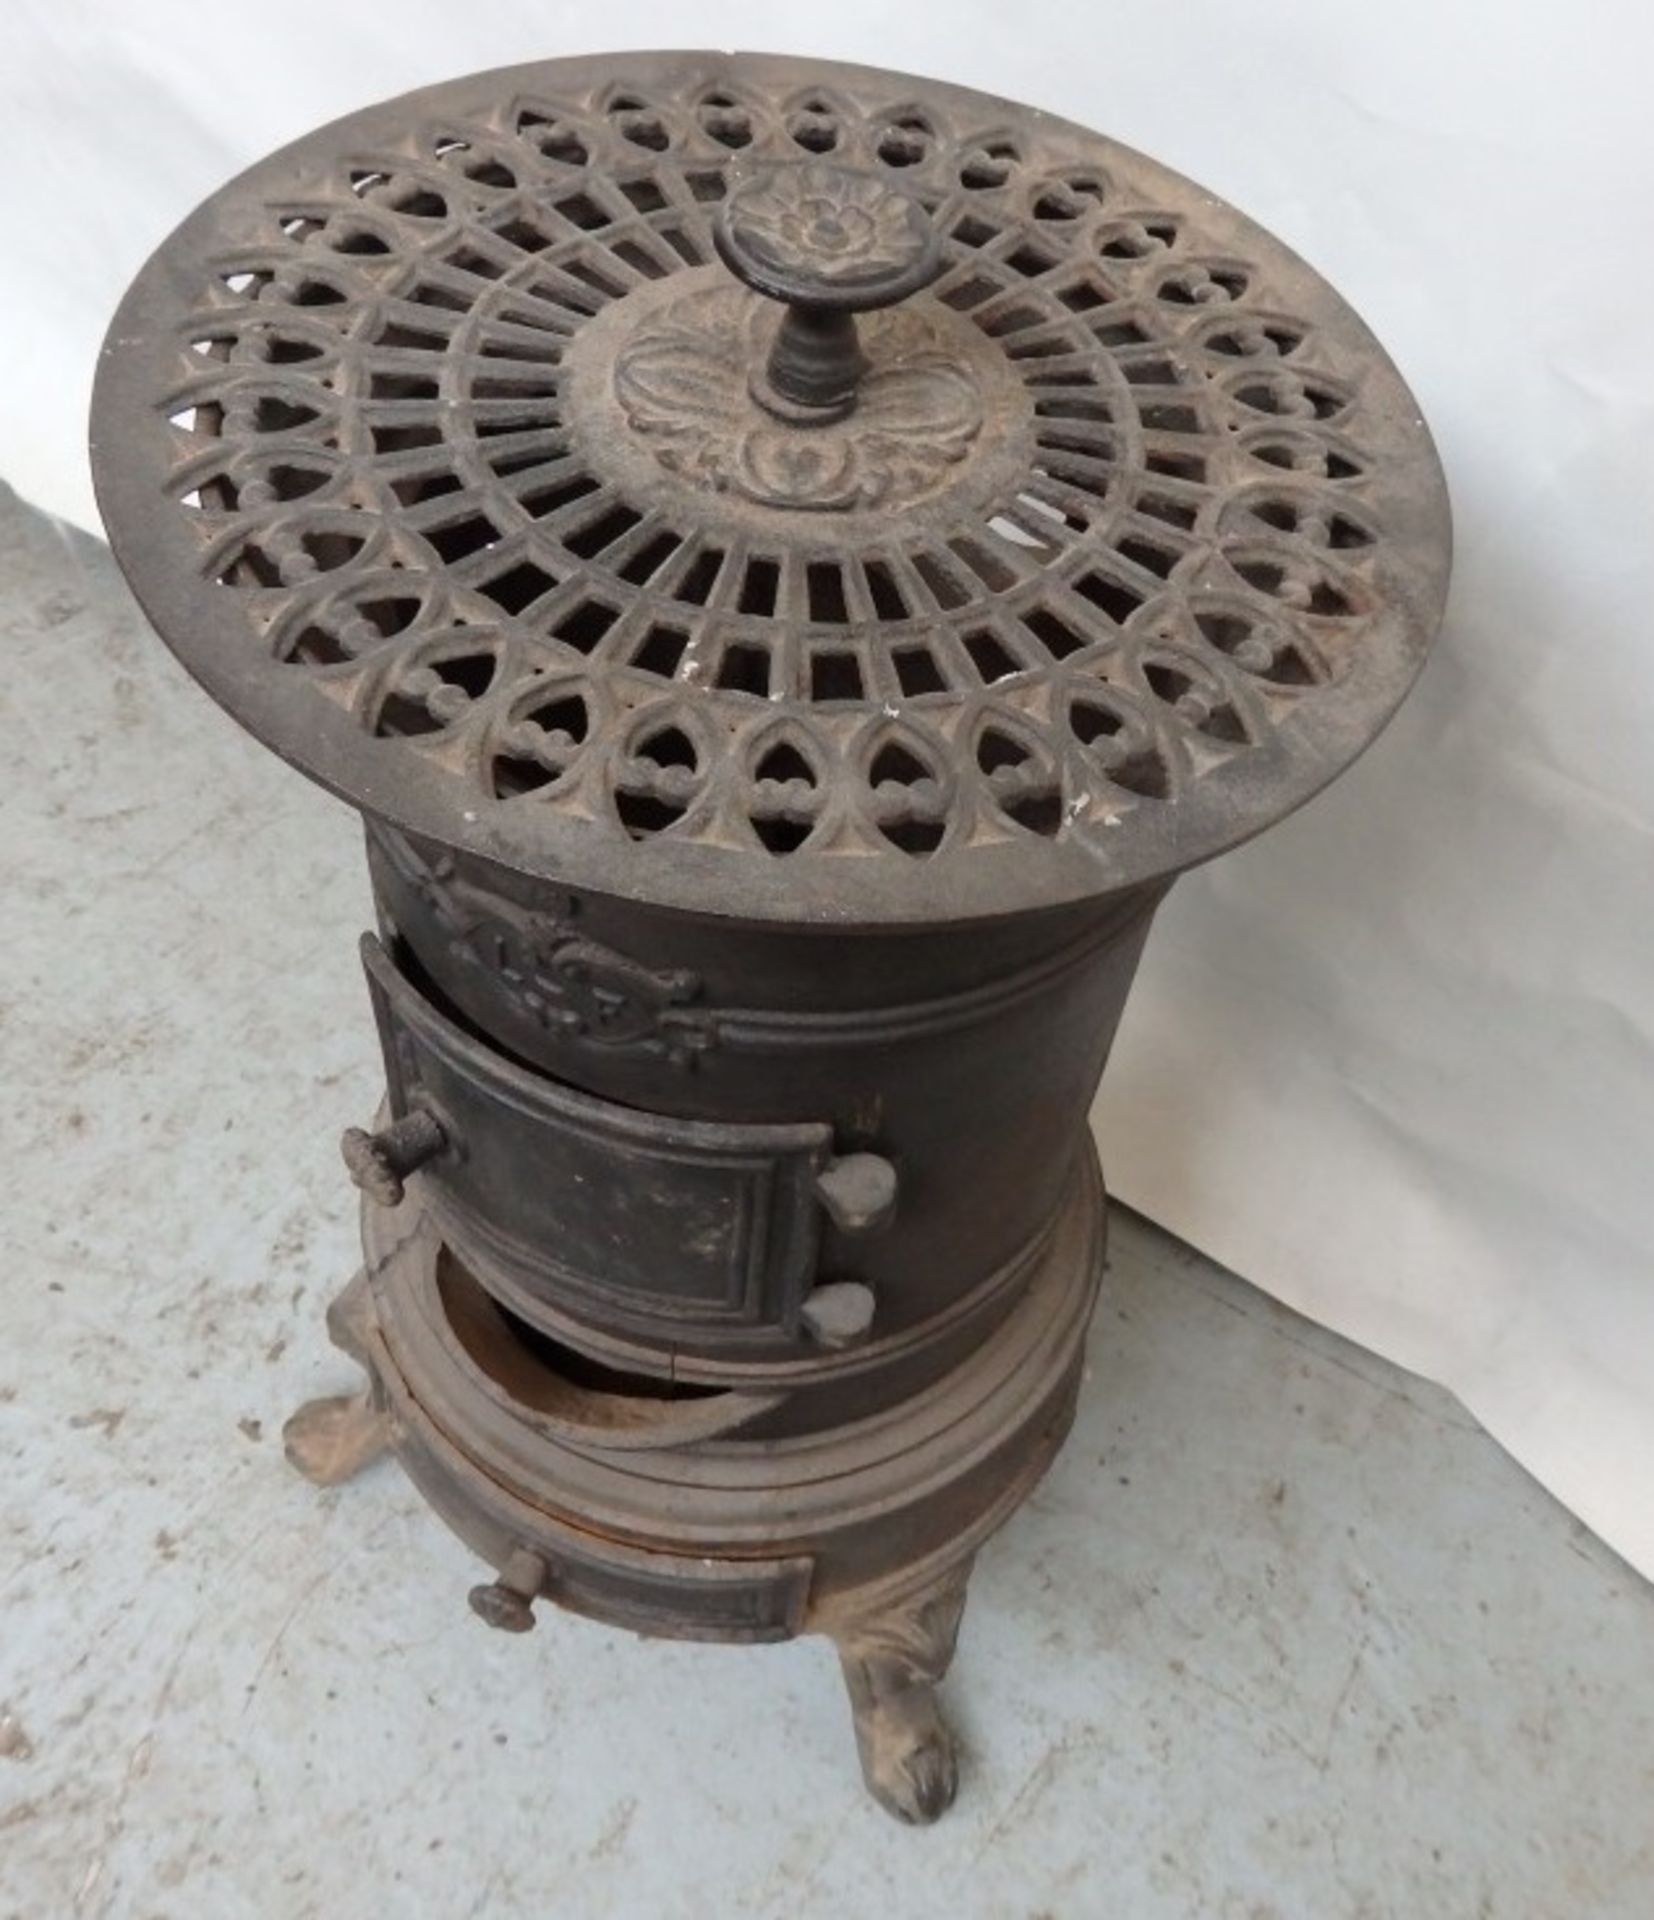 1 x Reclaimed Antique Cast Iron Potbelly Wood Burner / Stove - Dimensions: H61, Diameter 30cm - - Image 2 of 9